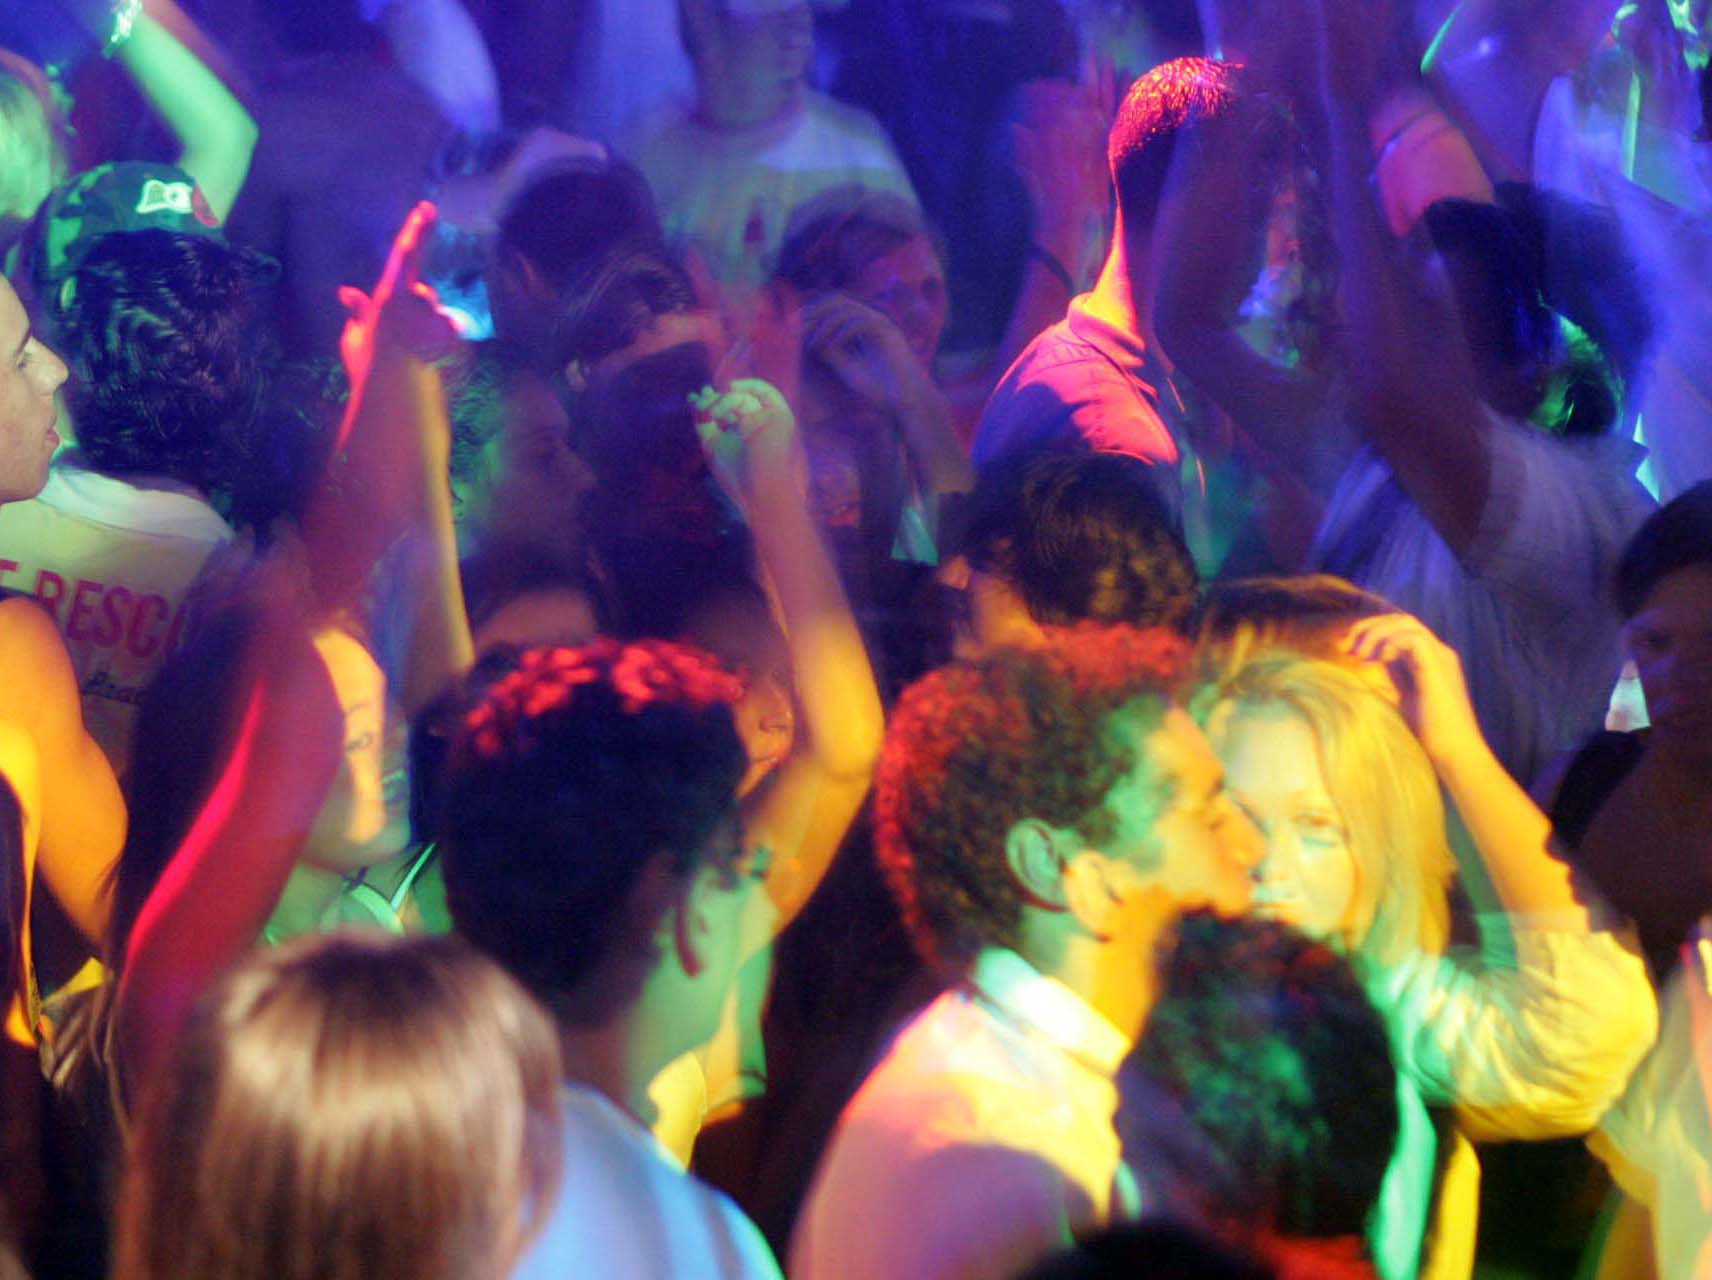 image Conflicting accounts of gay kiss in Limassol club